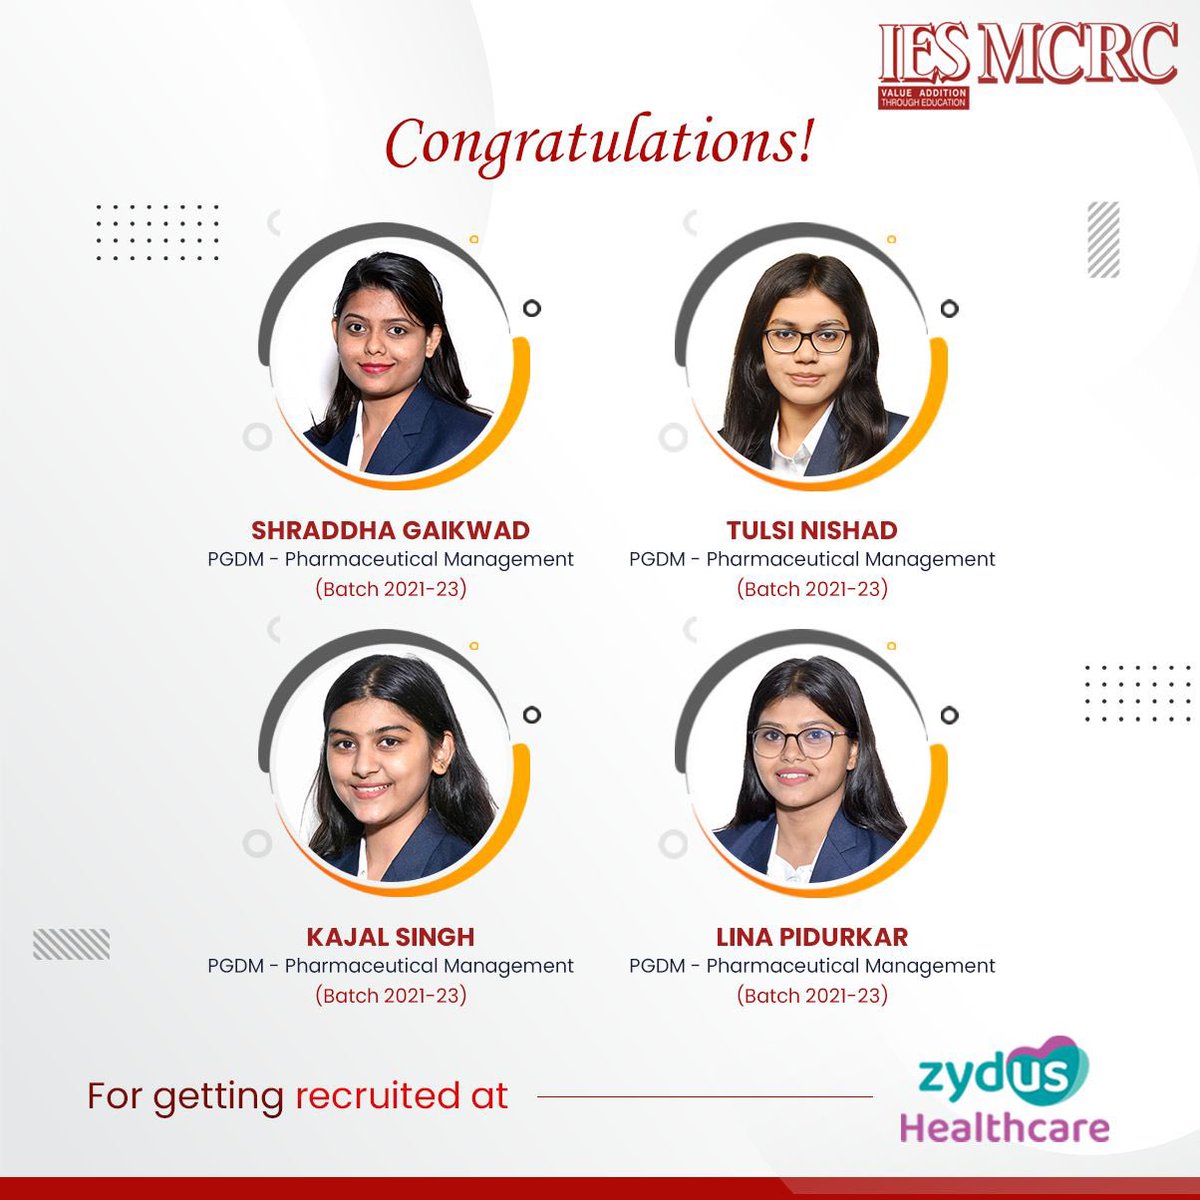 Hearty Congratulations!!!!
It gives us immense pleasure to witness the hard work paying off for the students.
 Best wishes to IES MCRC students for getting recruited at Zydus through IES MCRC.

#IESMCRC #Recruited #Congratulations #PlacementDrive #PGDM #Mumbai #Students